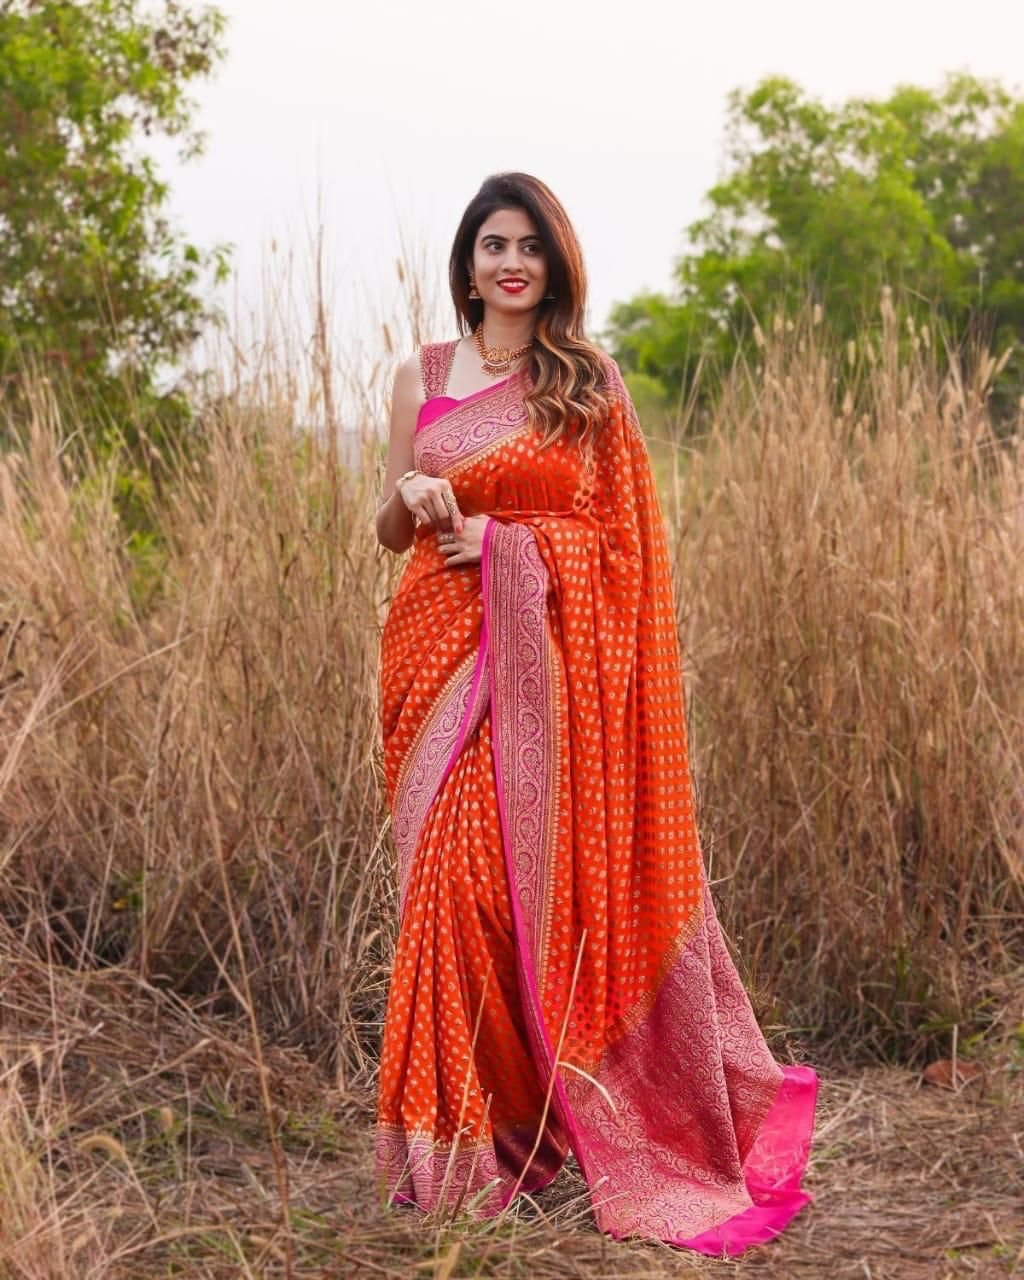 Do you have to constantly hold your hand in a pose when wearing a saree? -  Quora